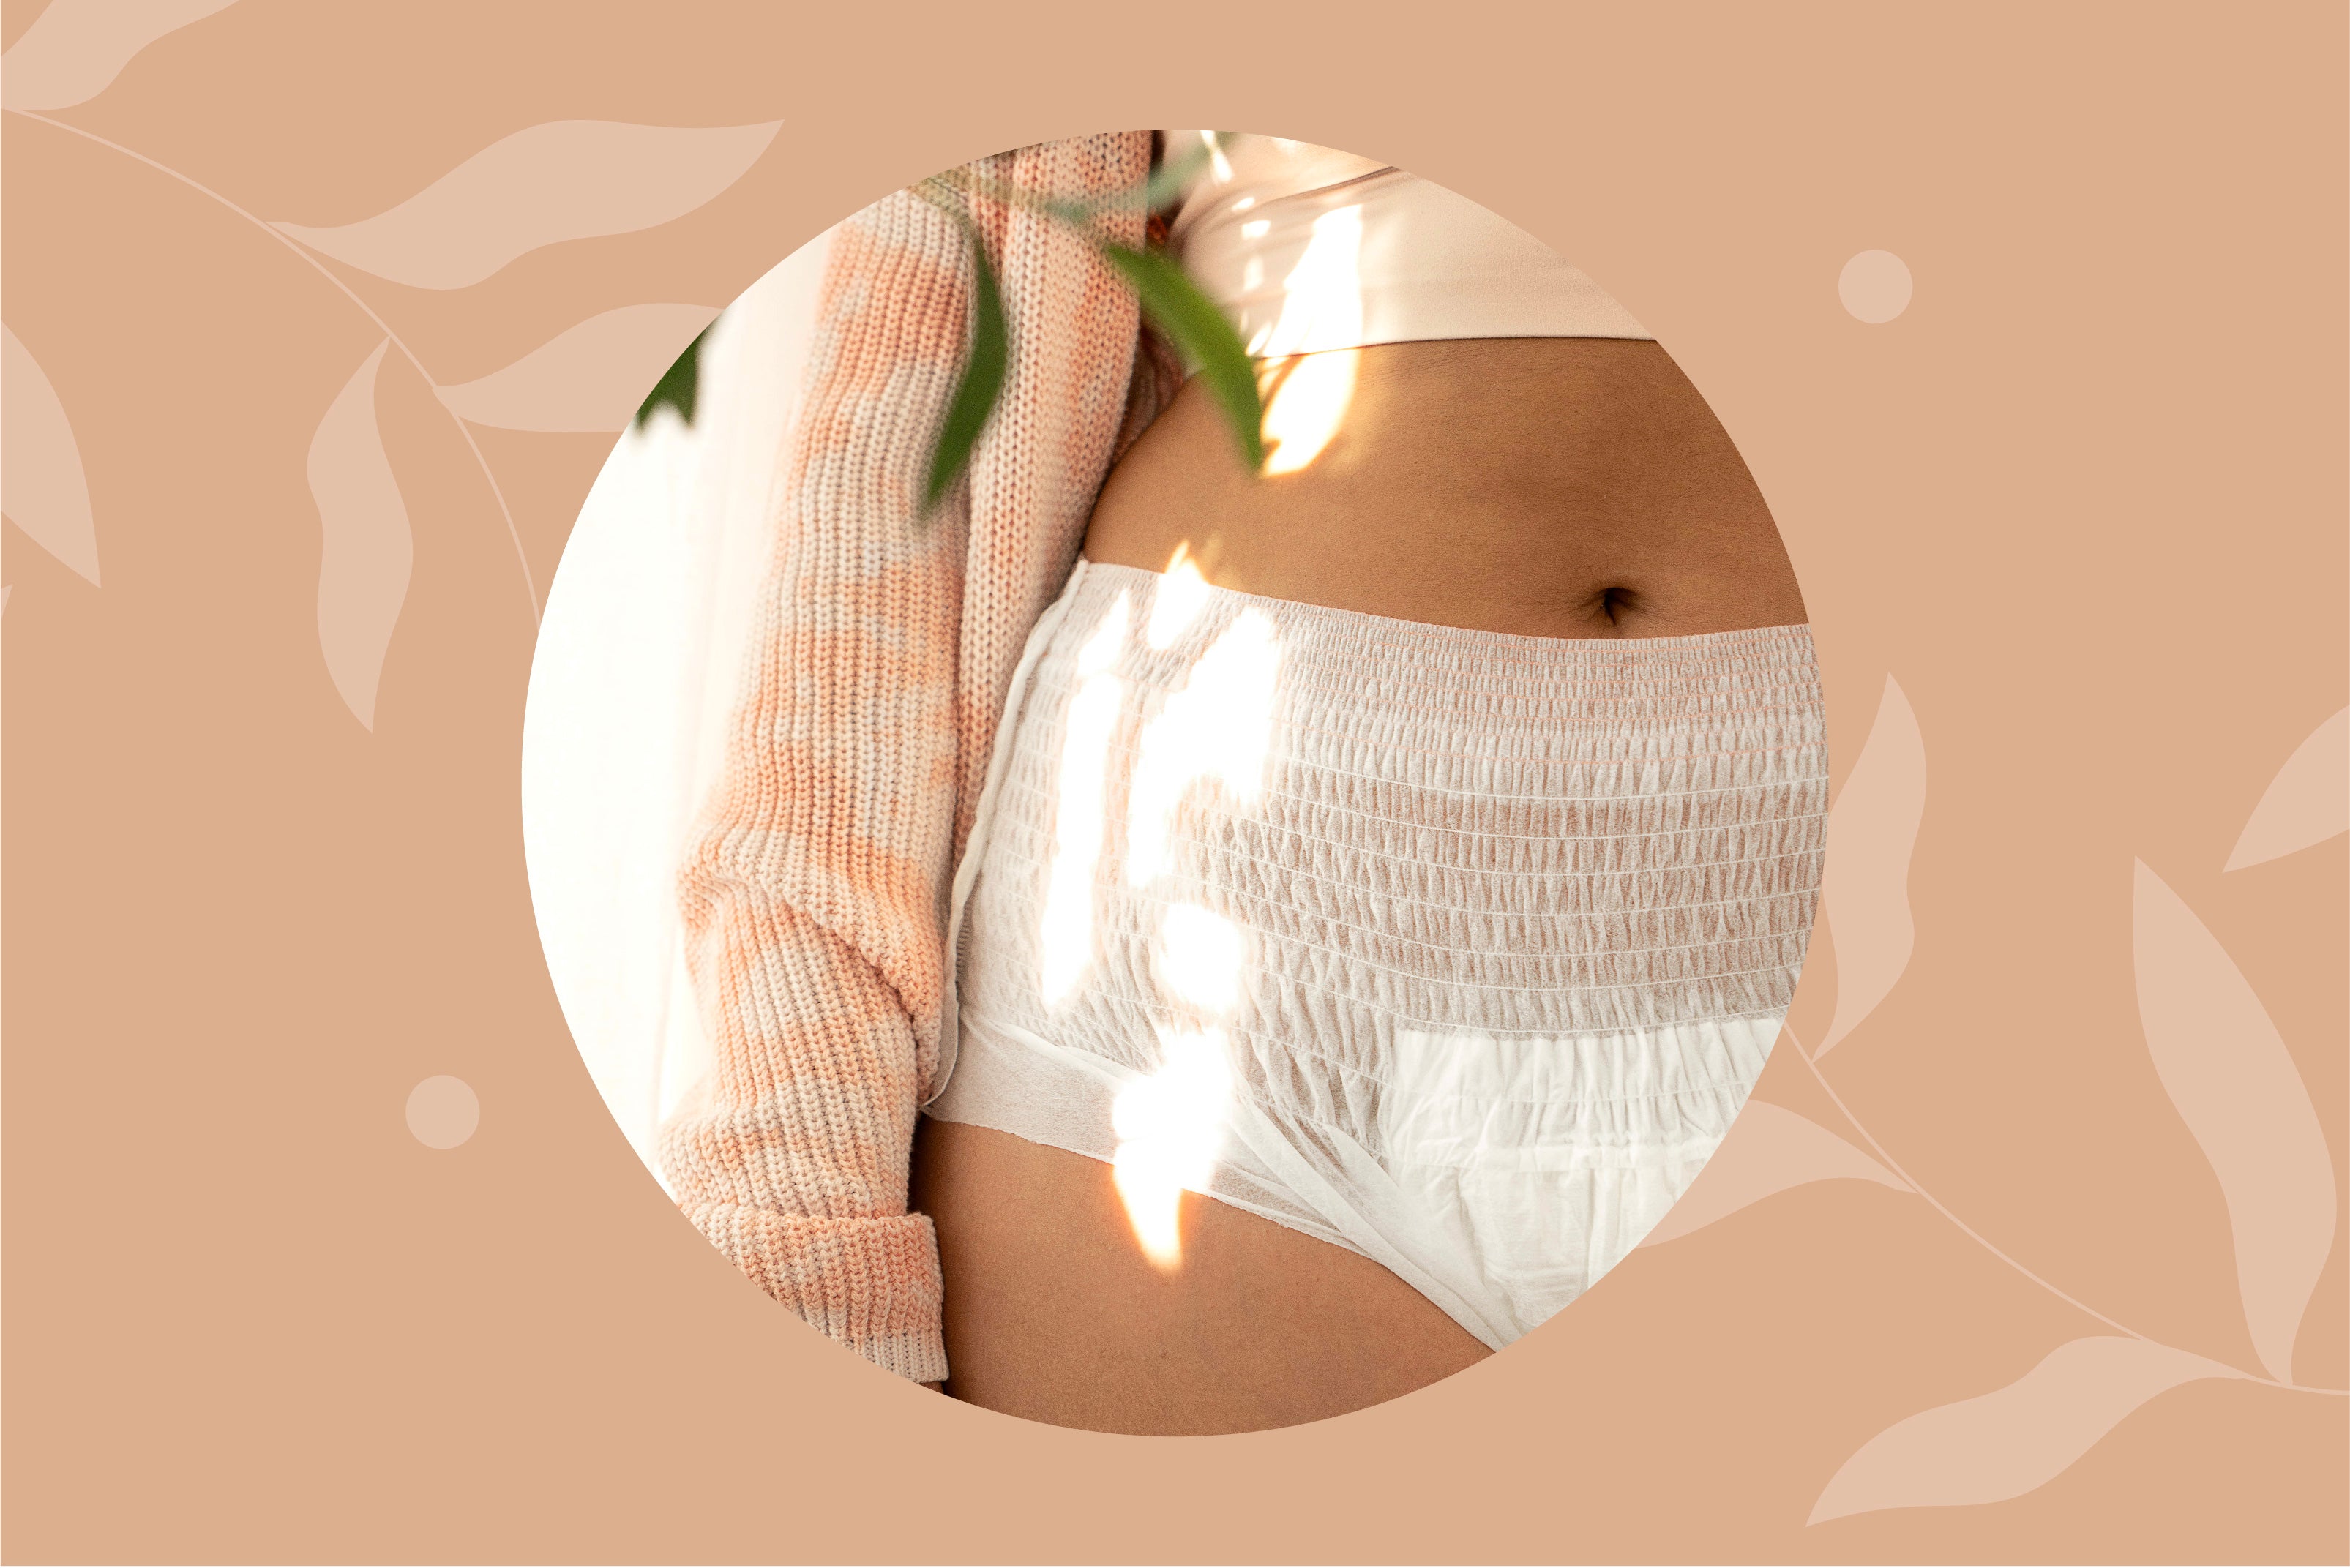 A circle cropped image of a woman wearing white underwear and a scented pad.